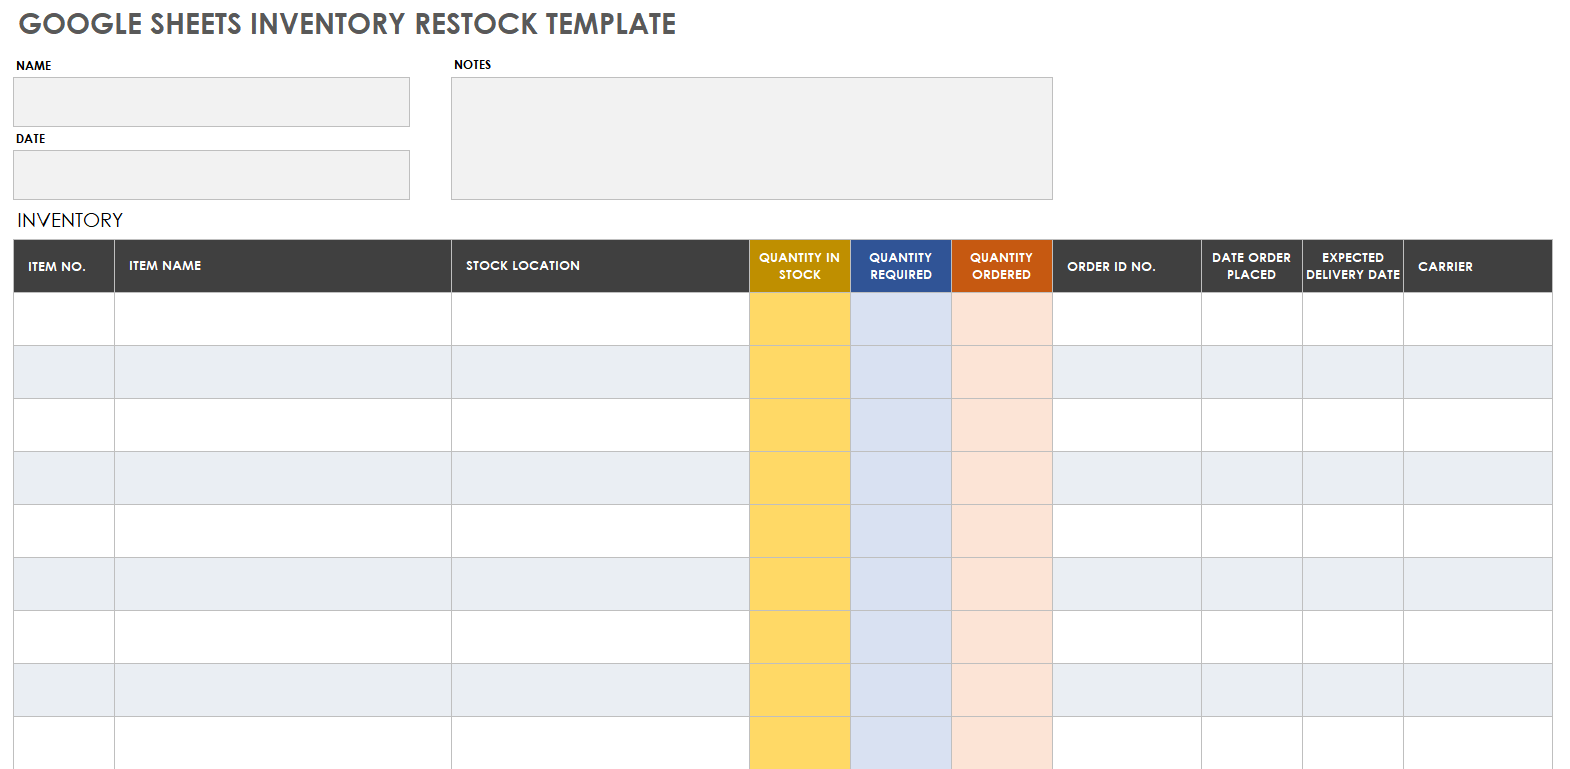 Google Sheets Inventory Restock Template